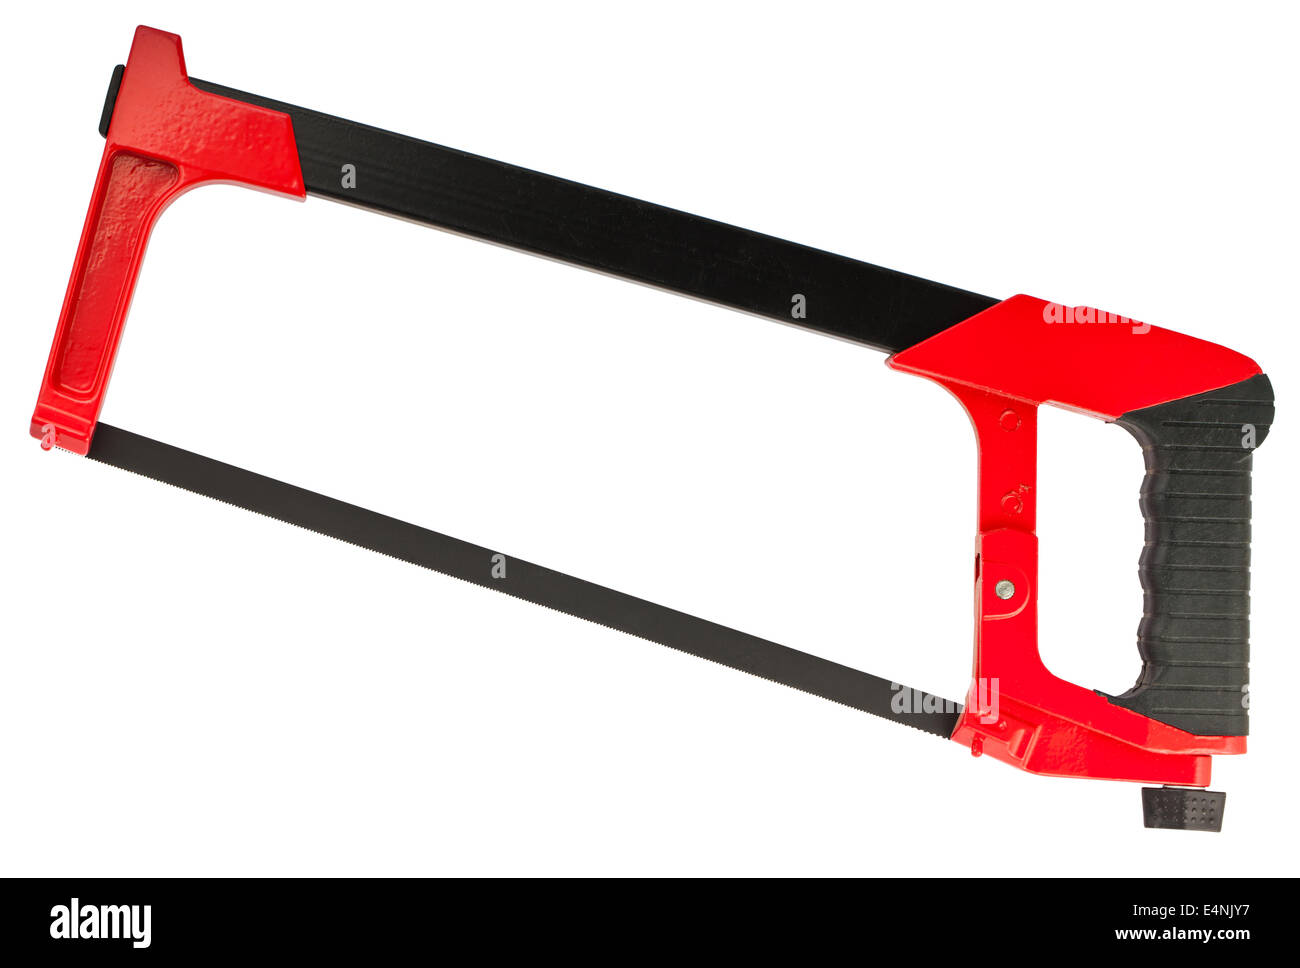 Hacksaw with red handle Stock Photo